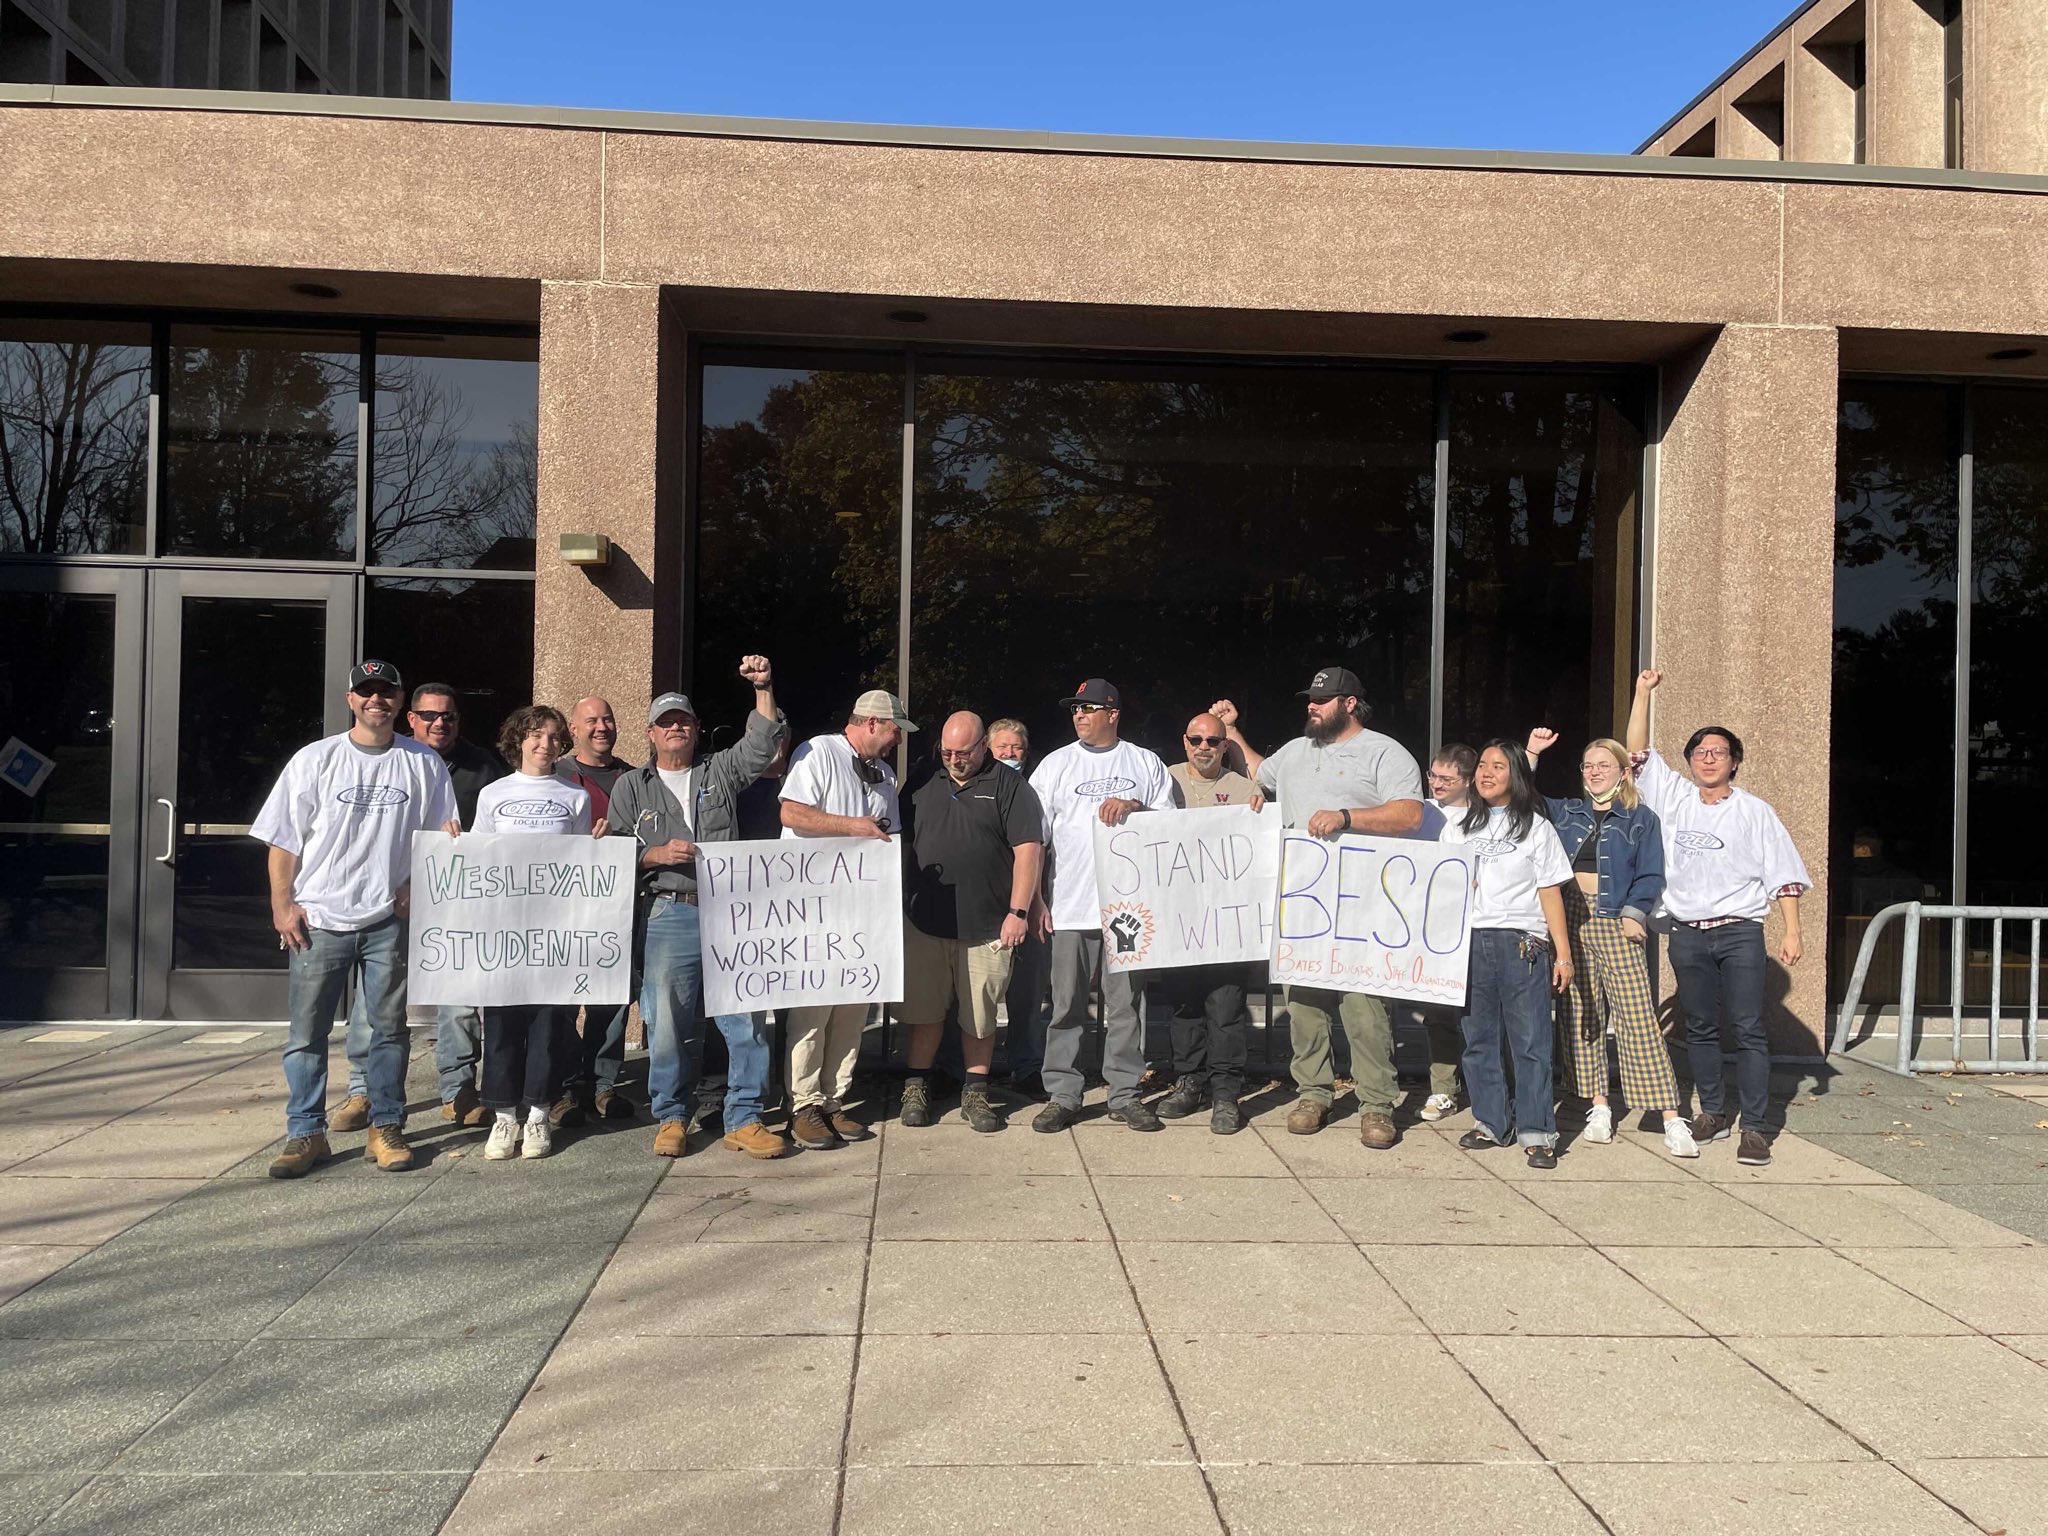 Physical Plant Workers and Wesleyan Students holding signs in solidarity with Bates workers